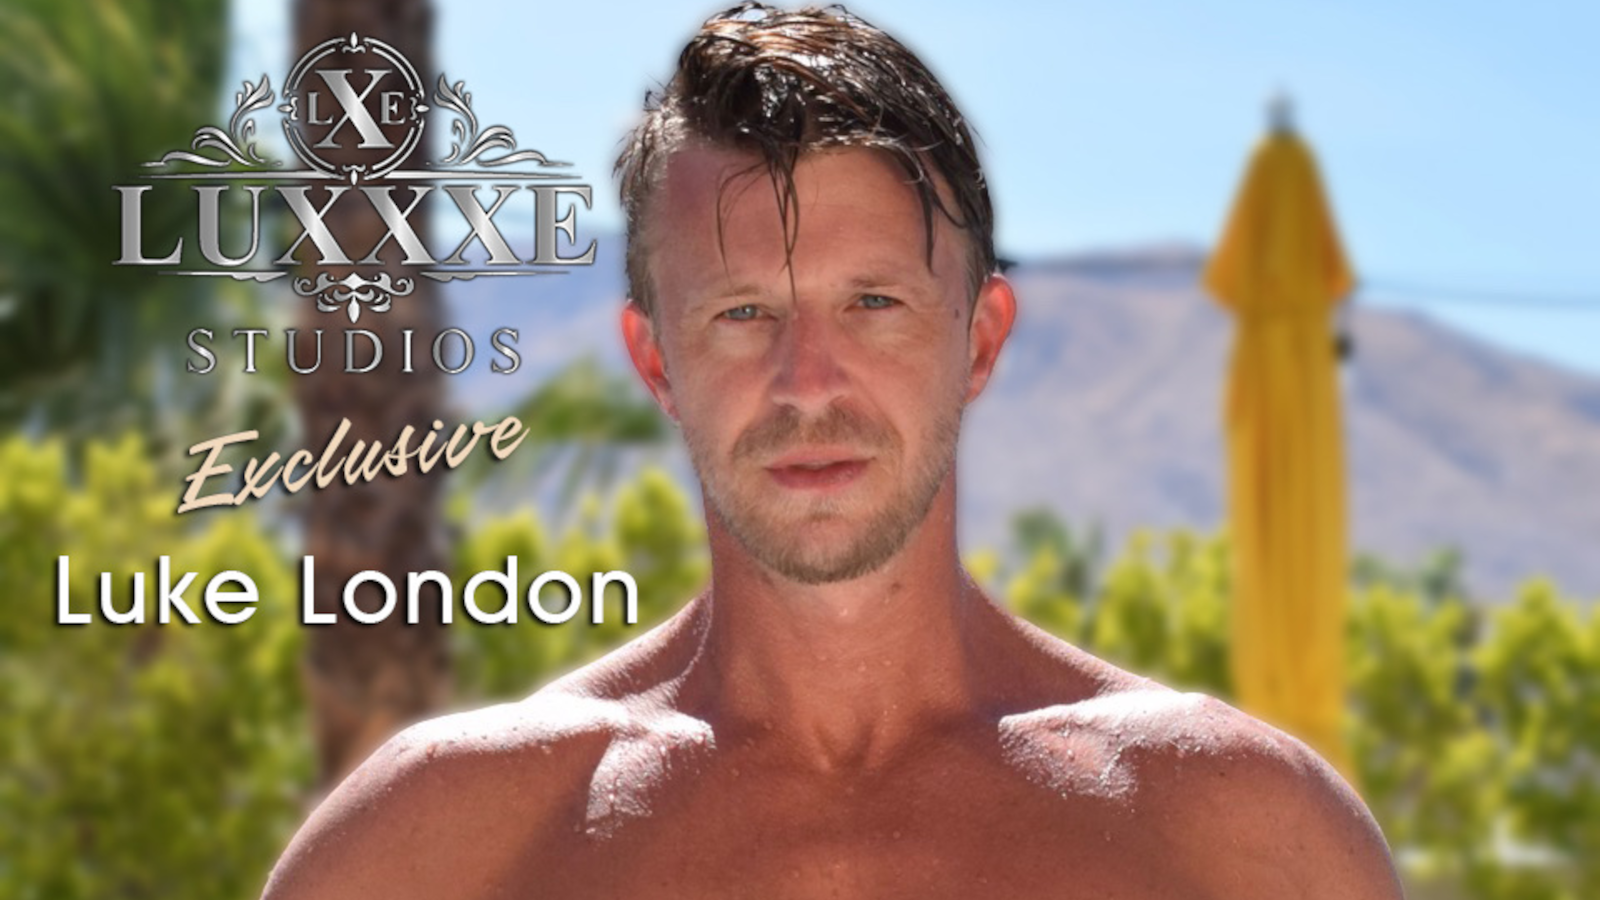 Luxxxe Studios Signs Newcomer Luke London to Exclusive Contract